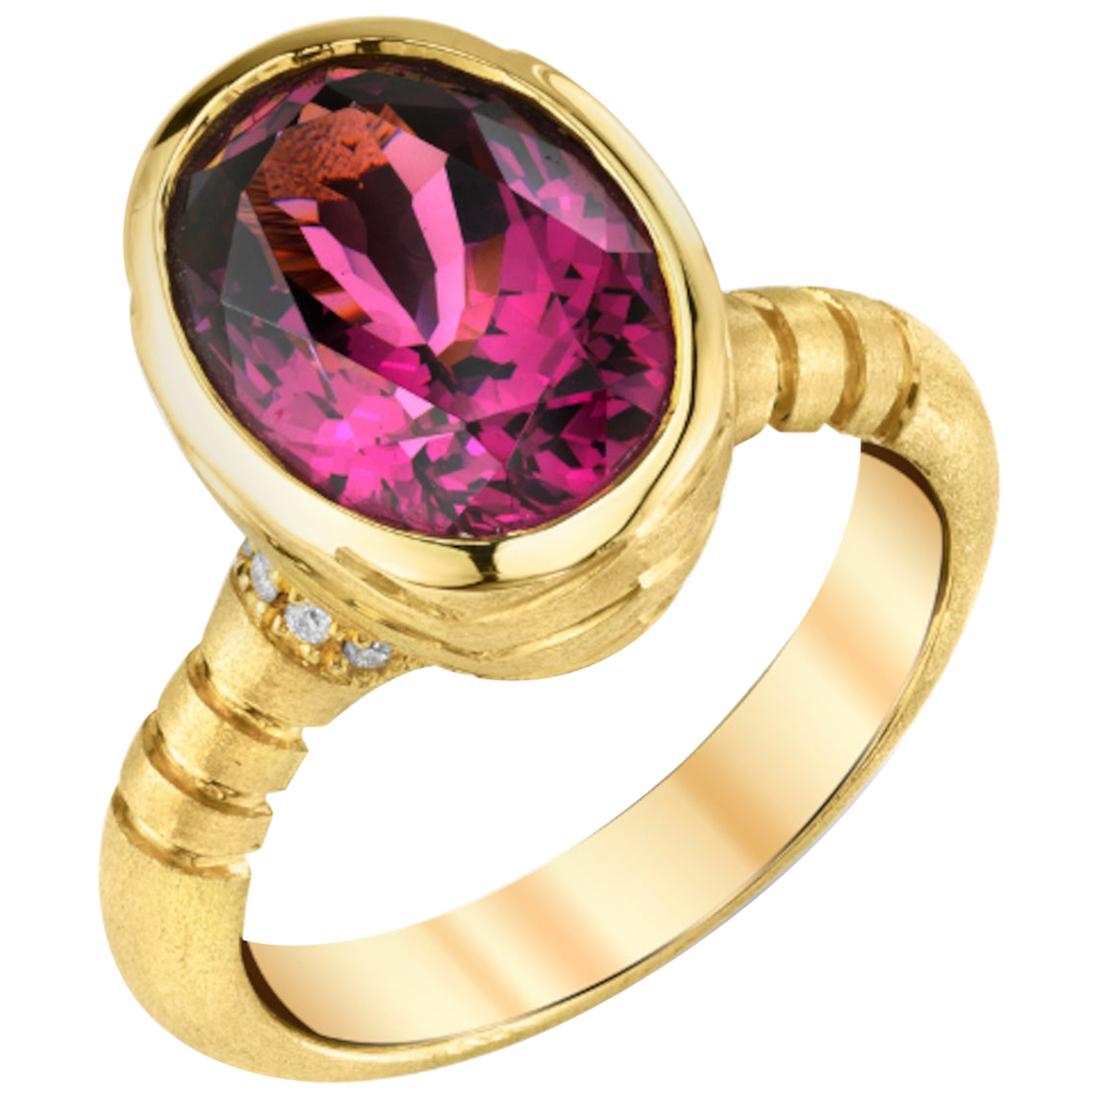 5.88 Carat Rhodolite Garnet and Diamond Ring in 18k Yellow Gold  For Sale